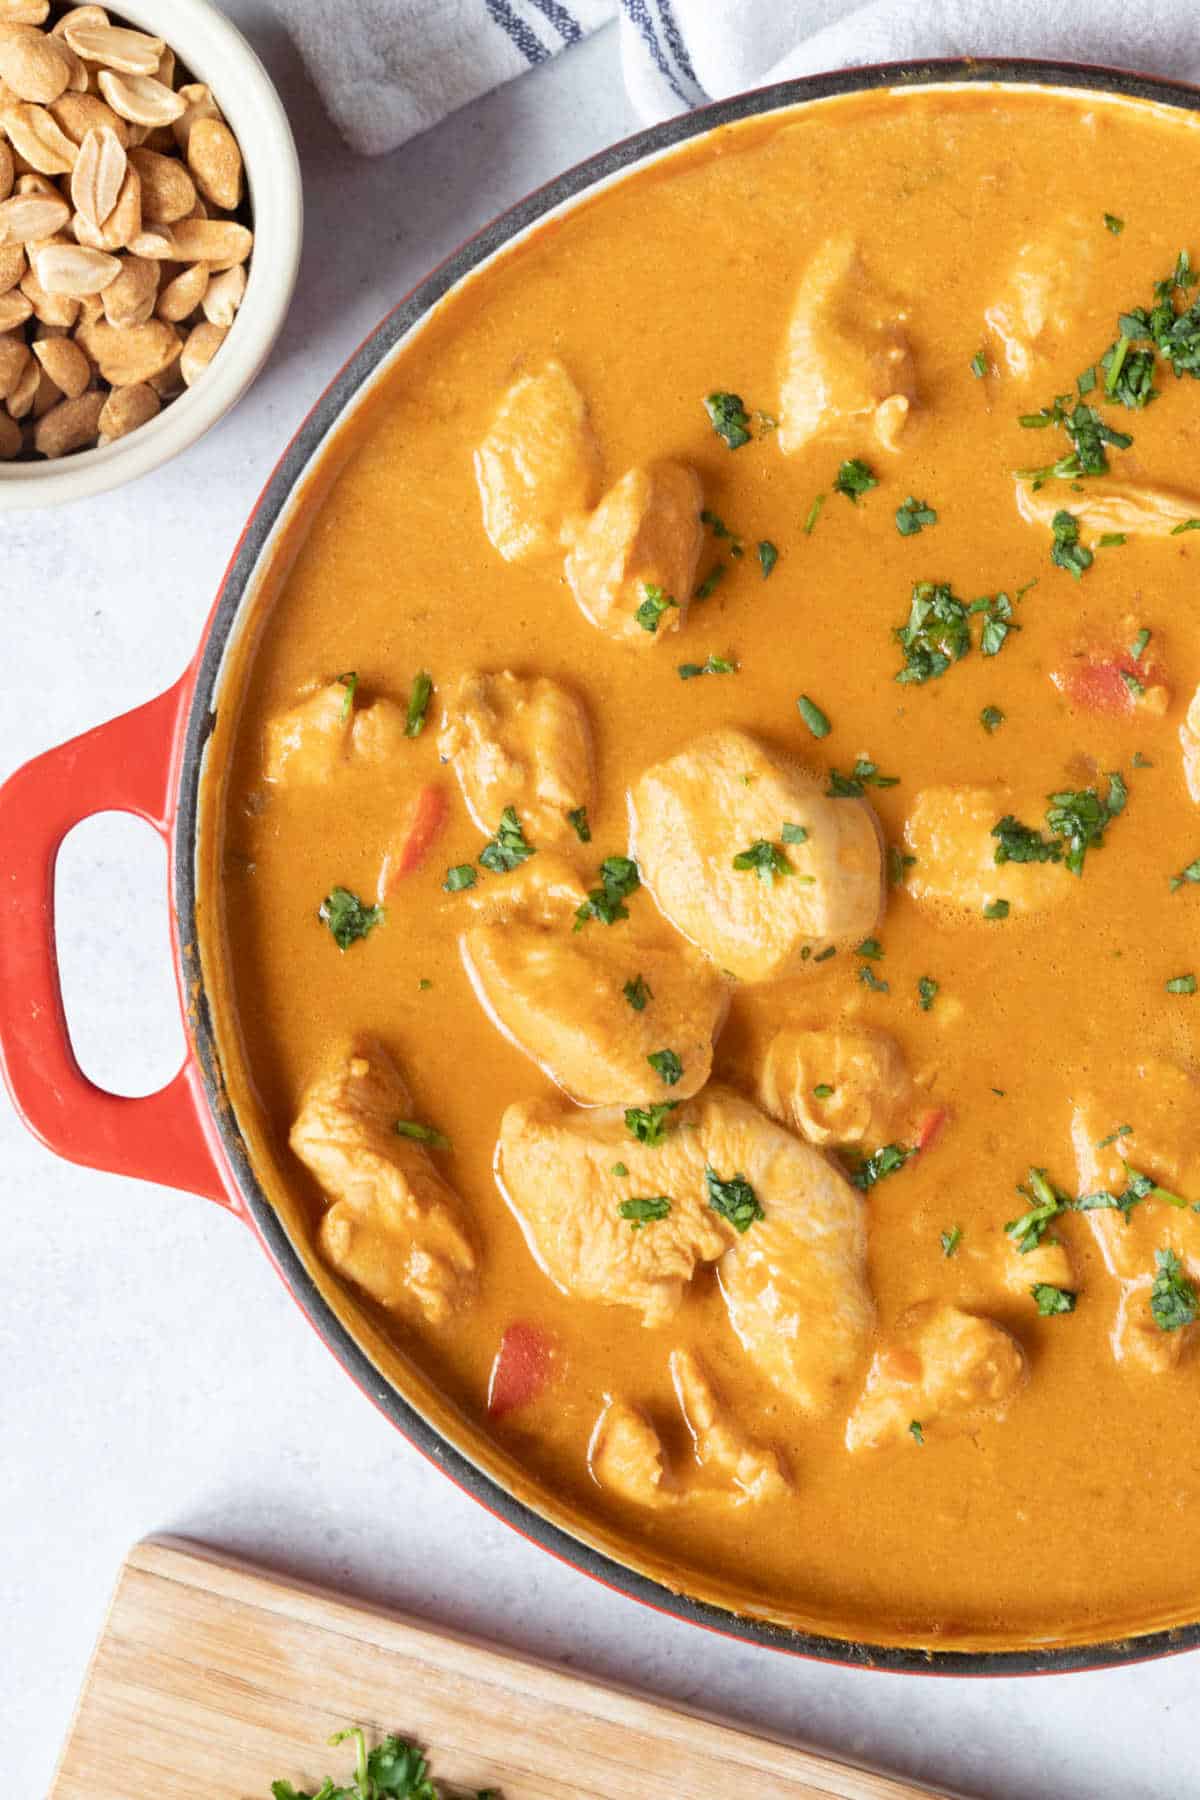 A pan or peanut butter chicken curry with a small bowl of salted peanuts on the side.